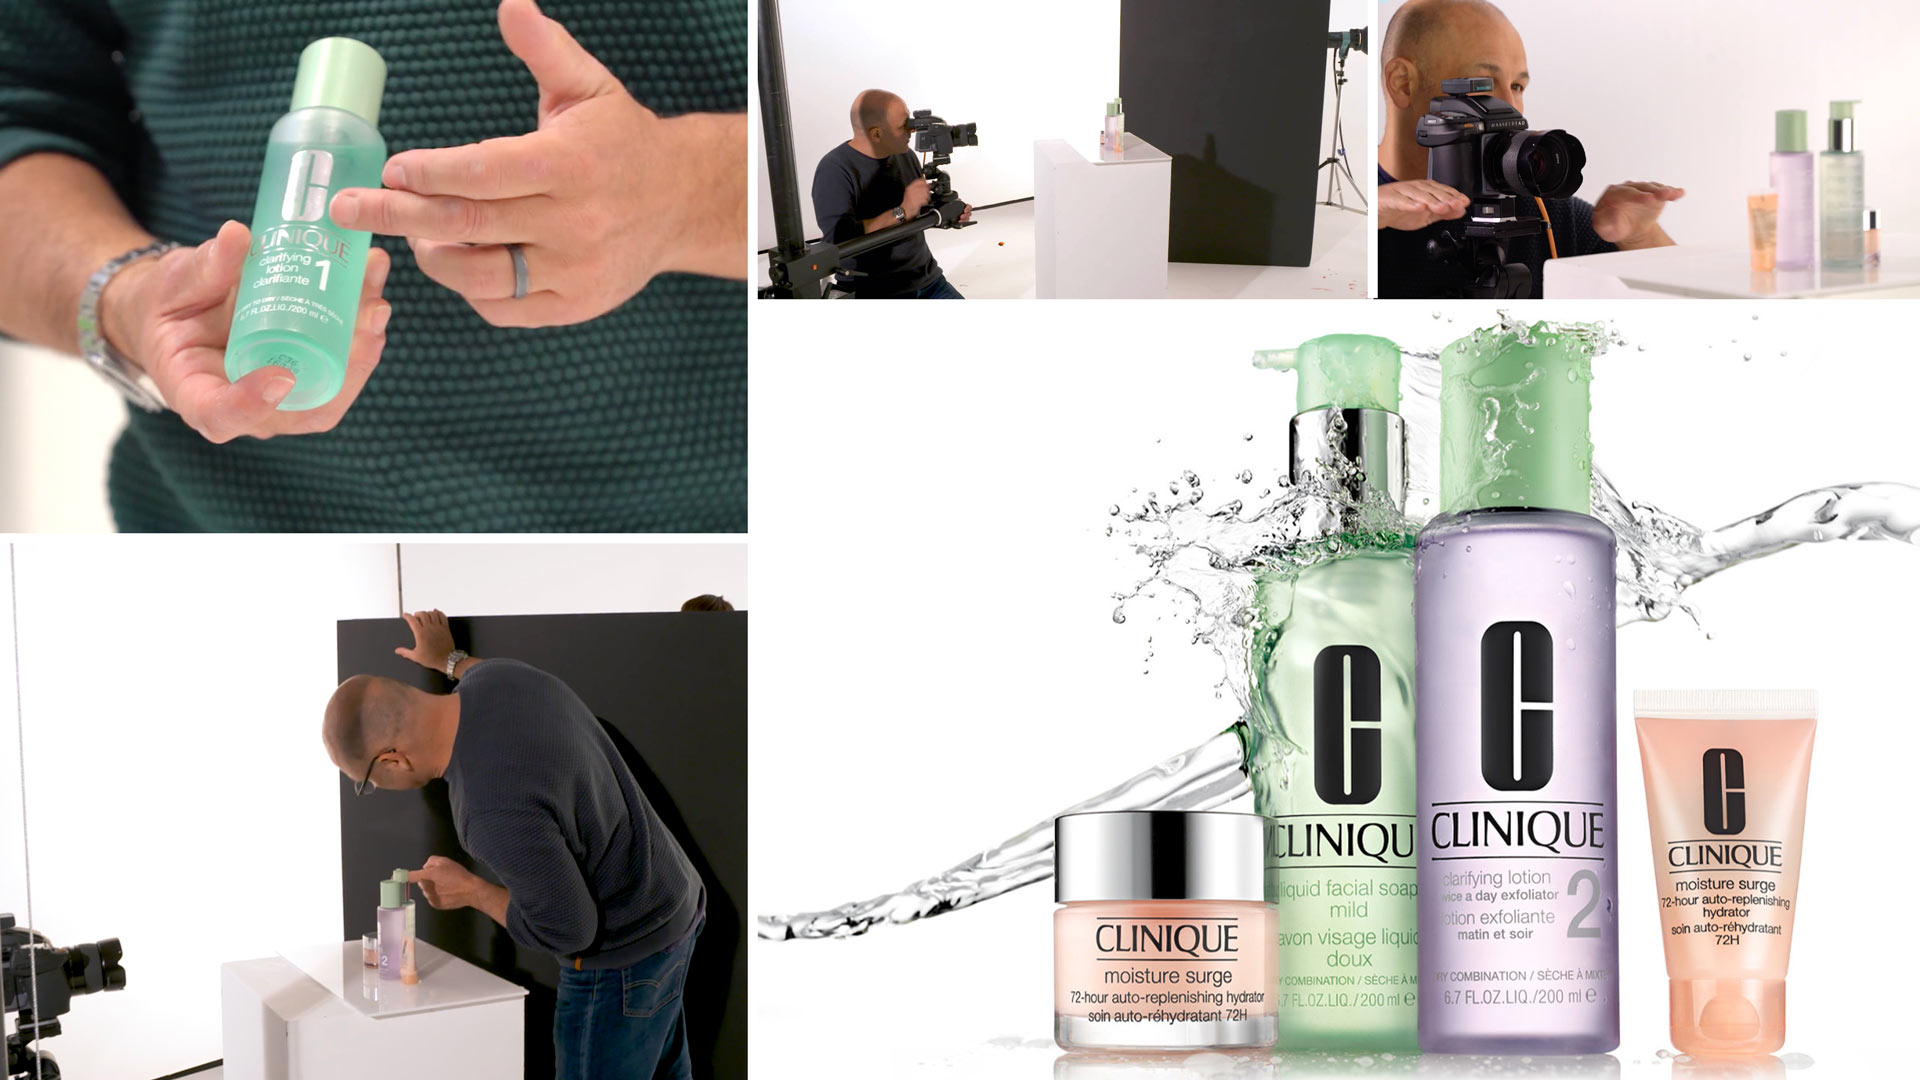 Clinique Shoot 1: Planning and Lighting